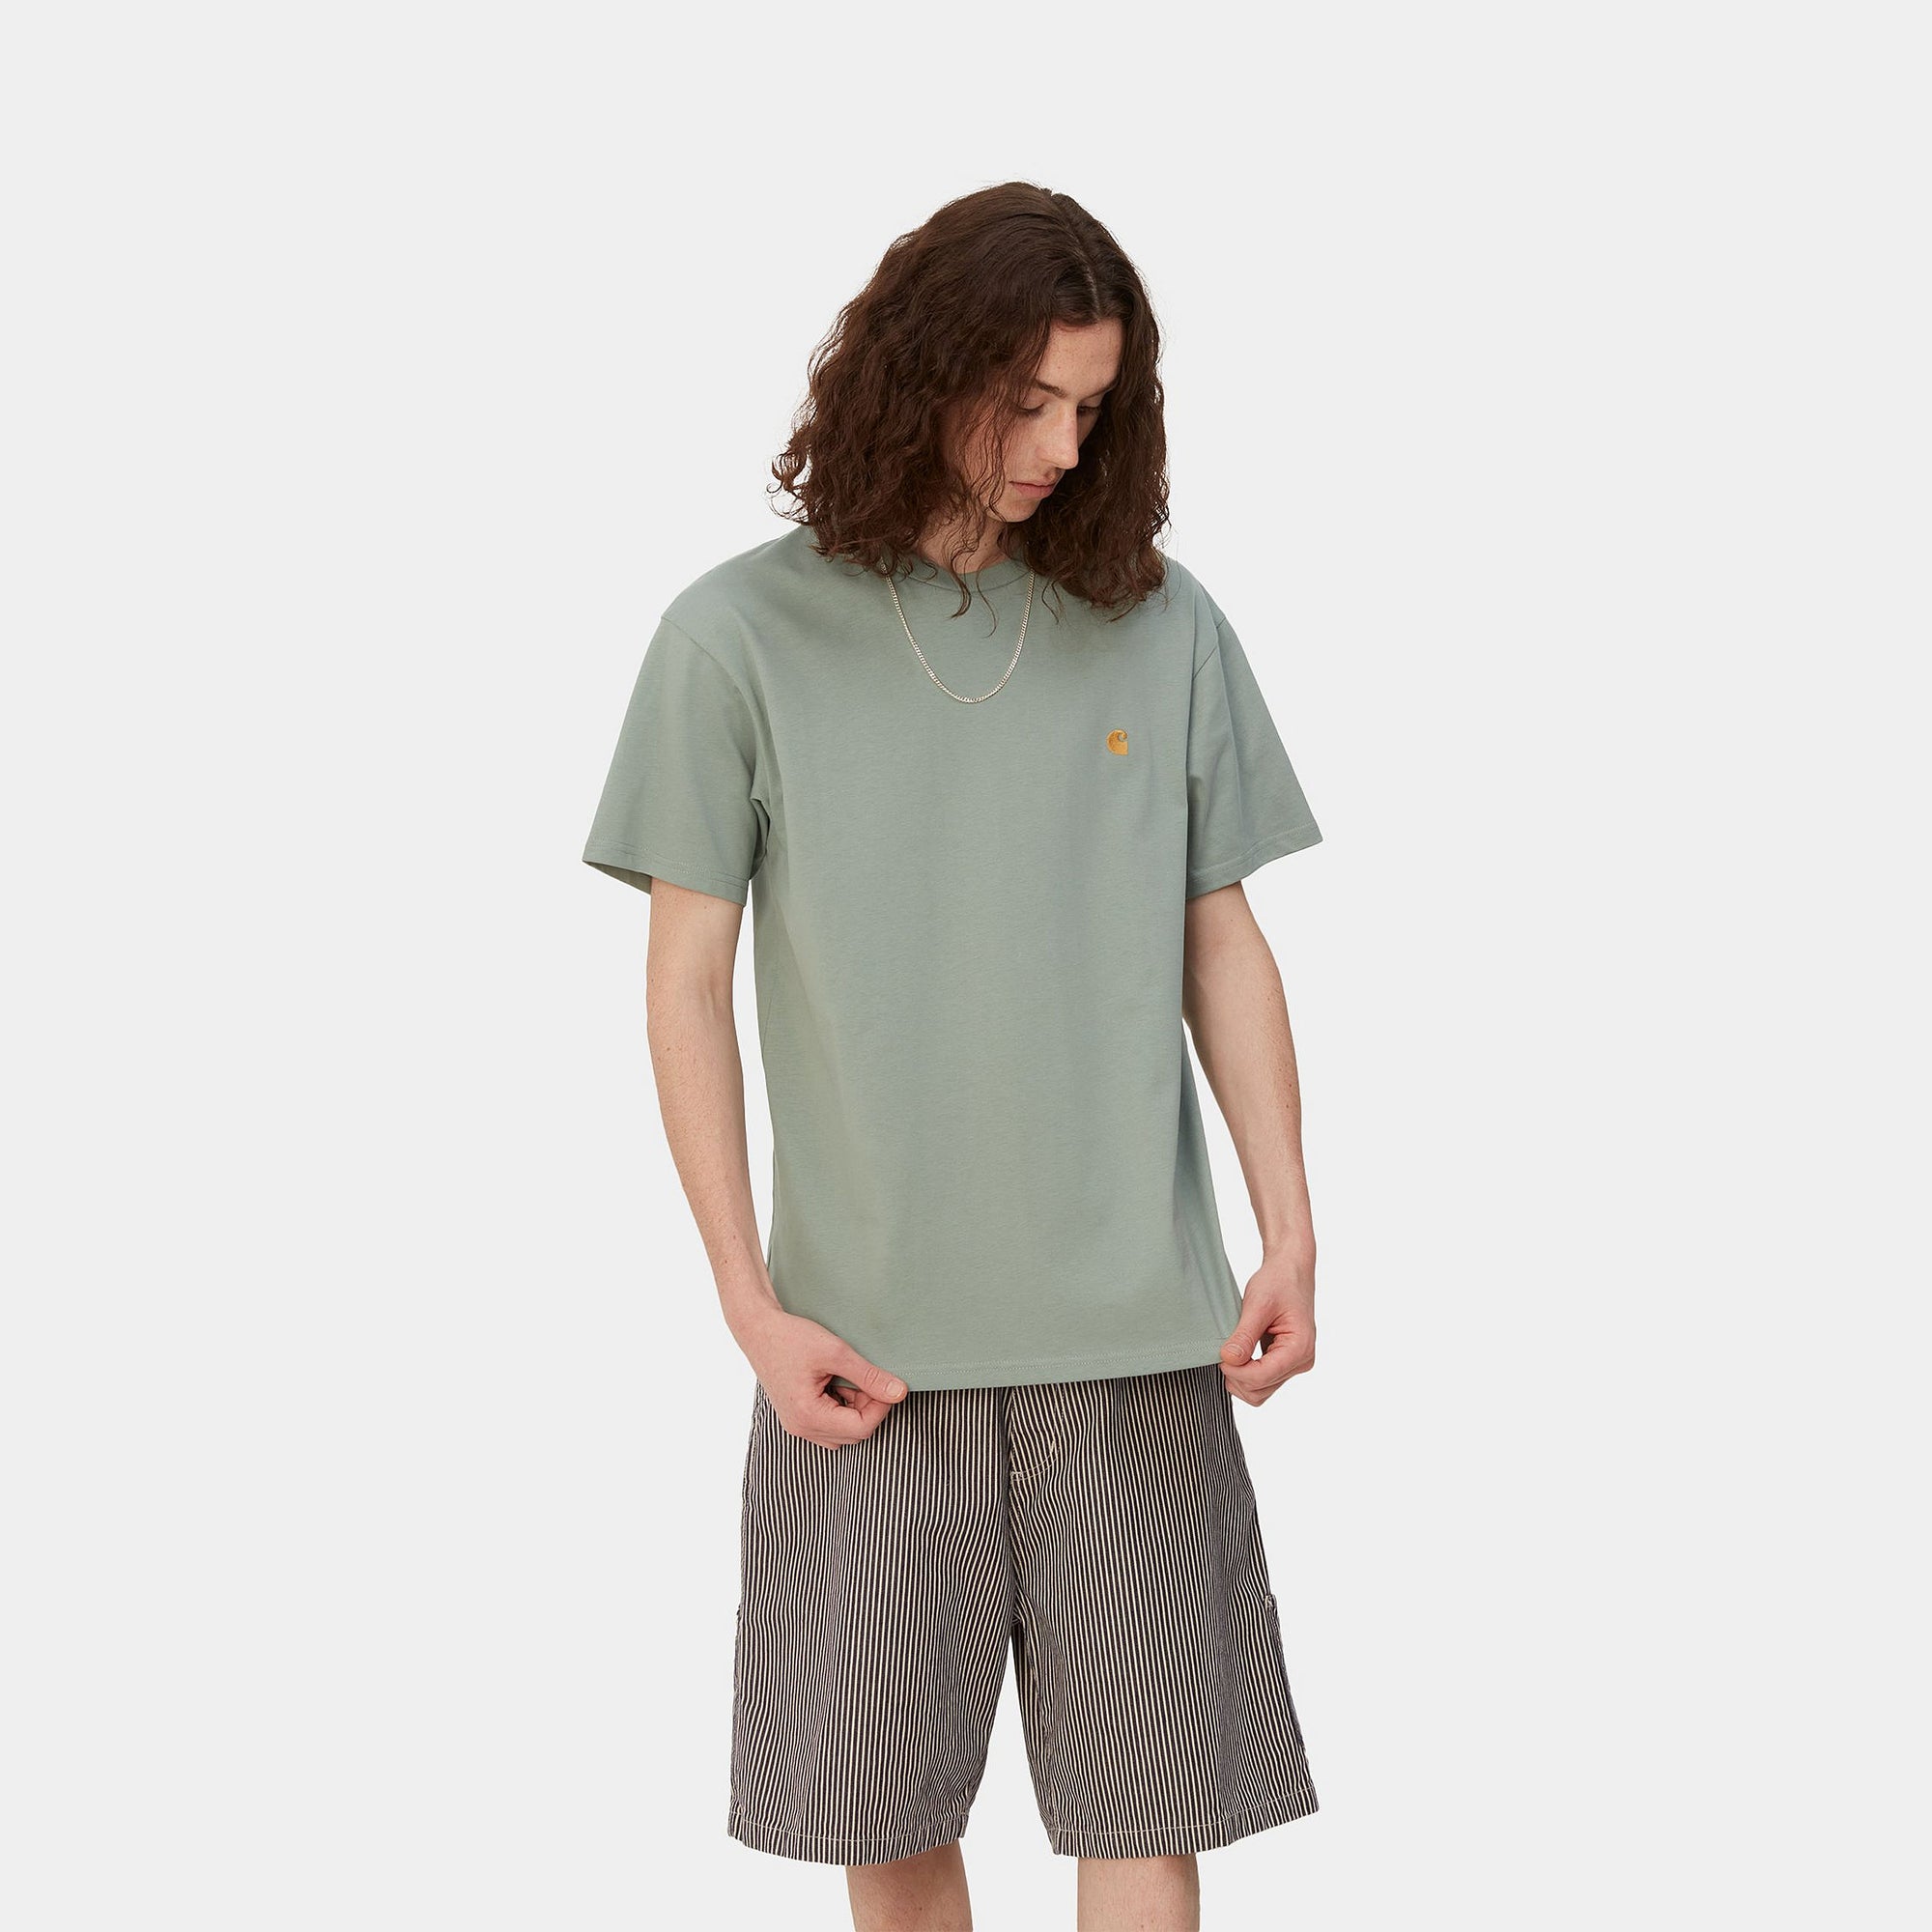 Carhartt WIP S/S Chase T-Shirt (glassy teal/gold) - Blue Mountain Store